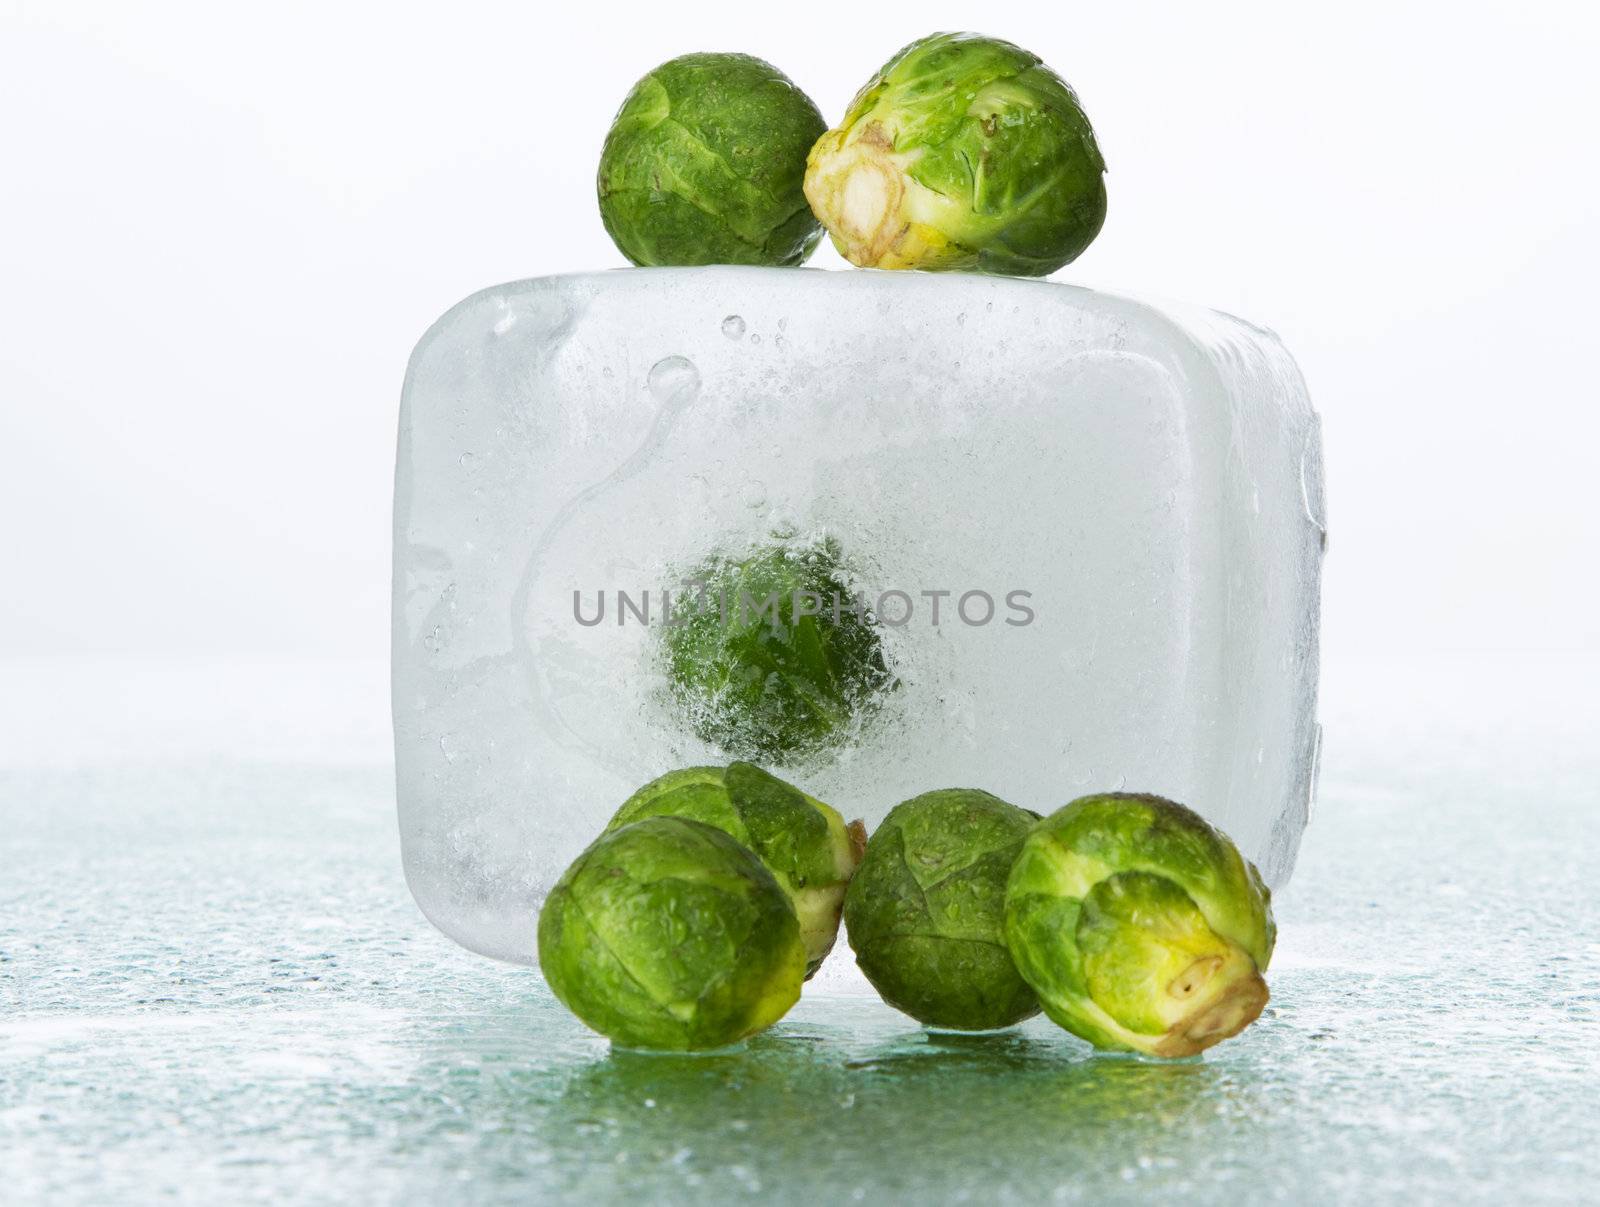 Brussels sprout on wet surface, studio still life